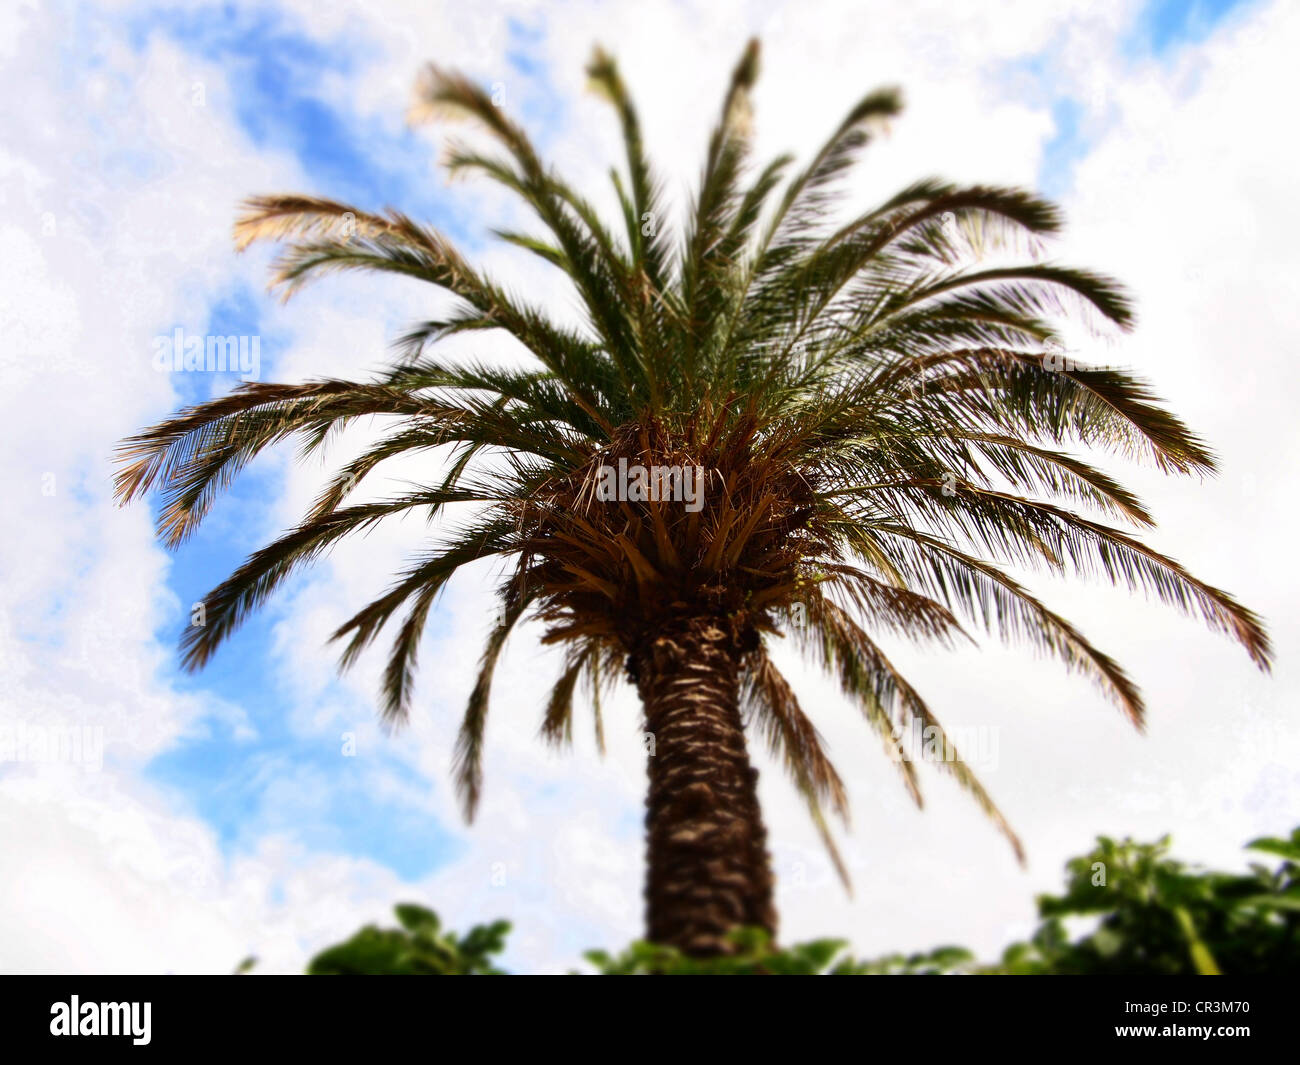 Palm (Arecaceae, Palmae), out of focus Stock Photo